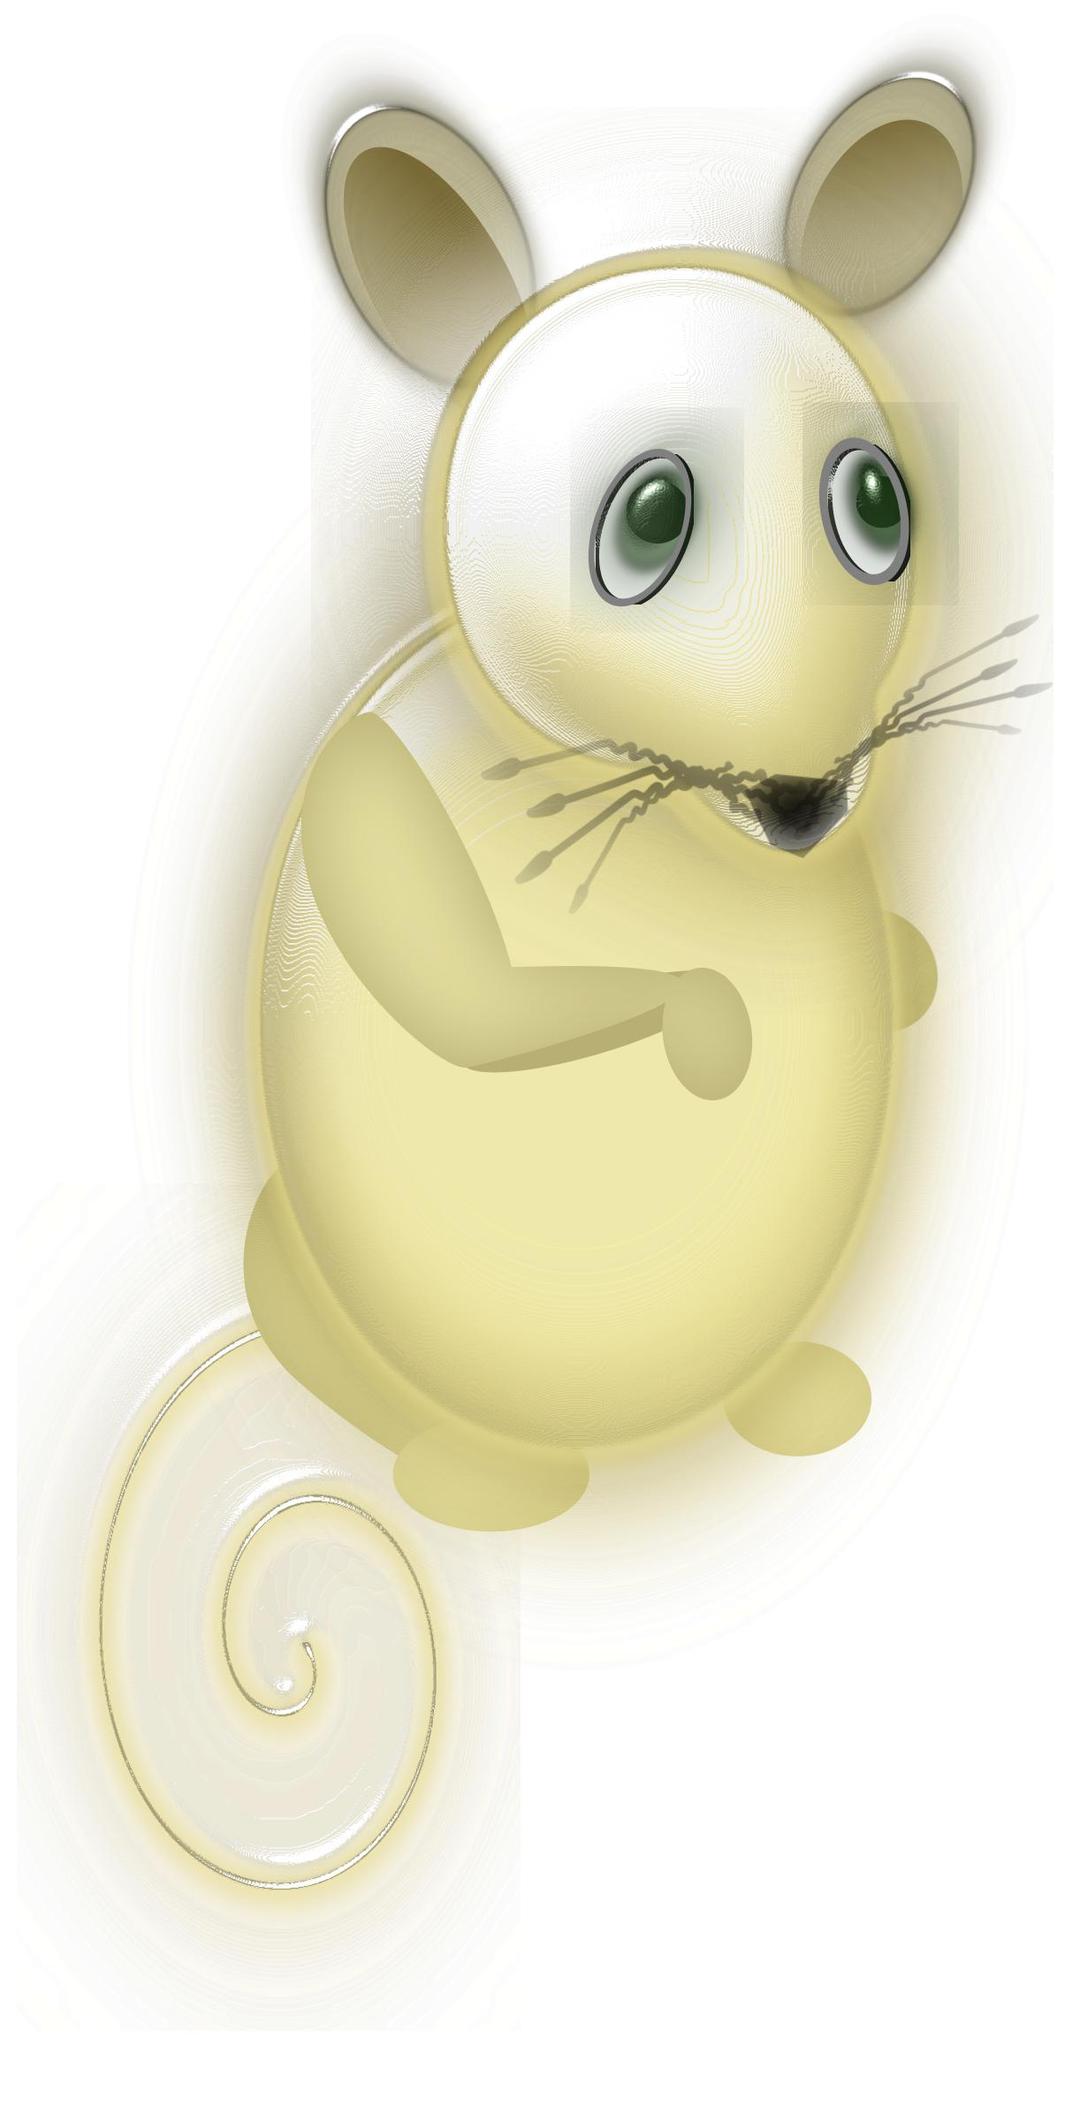 Tan and white large-eyed mouse png transparent